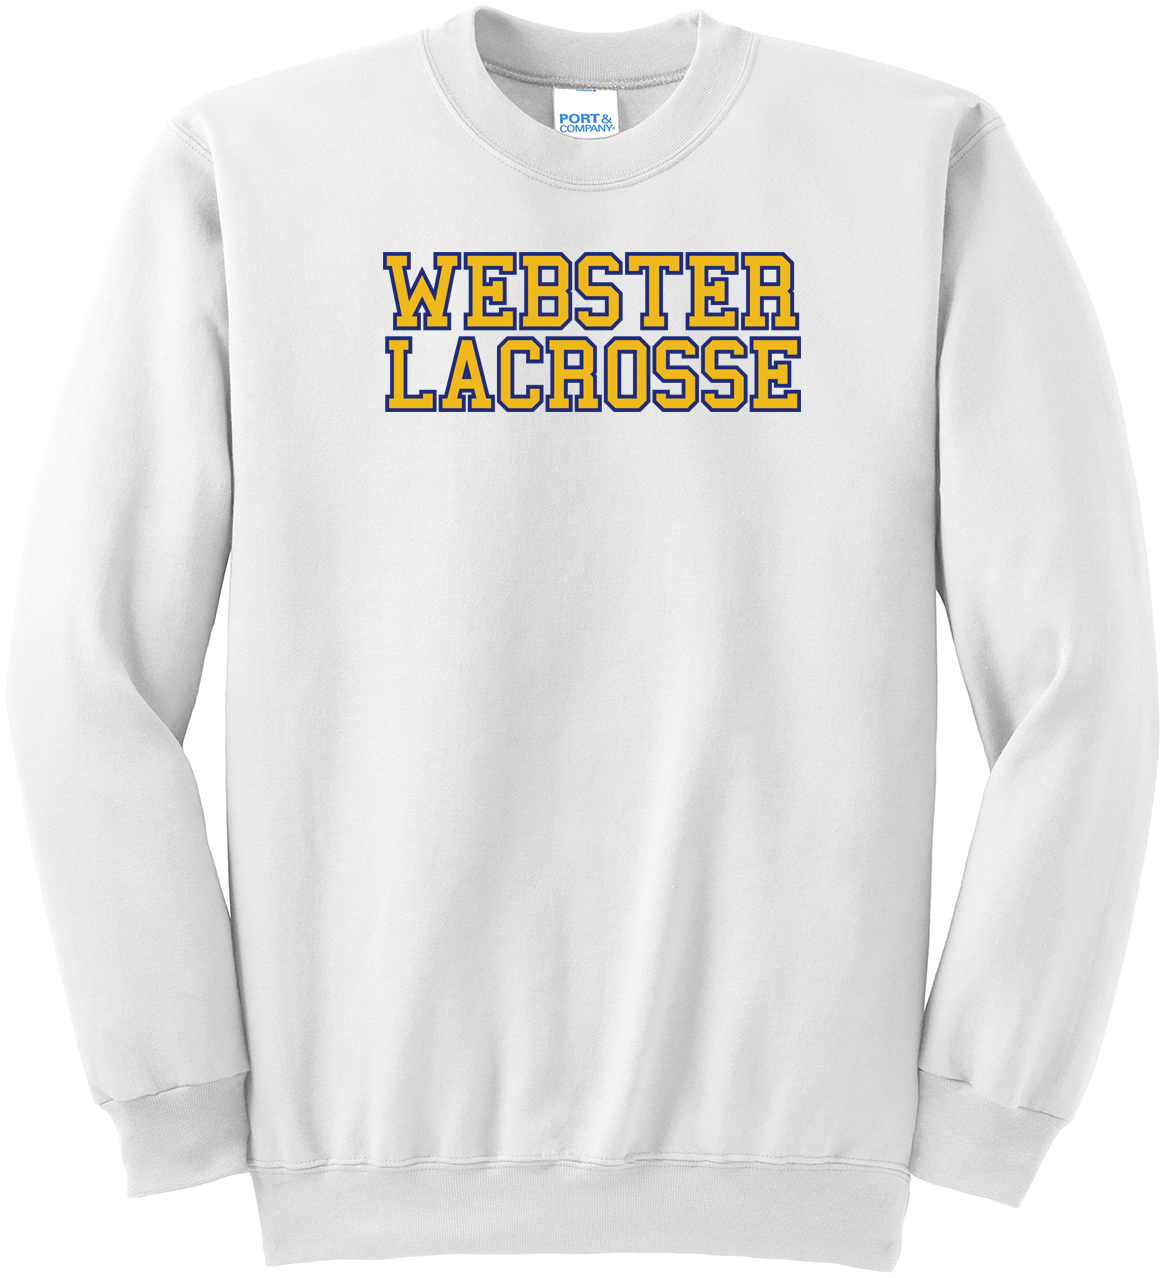 Webster Lacrosse White Crew Neck Sweater